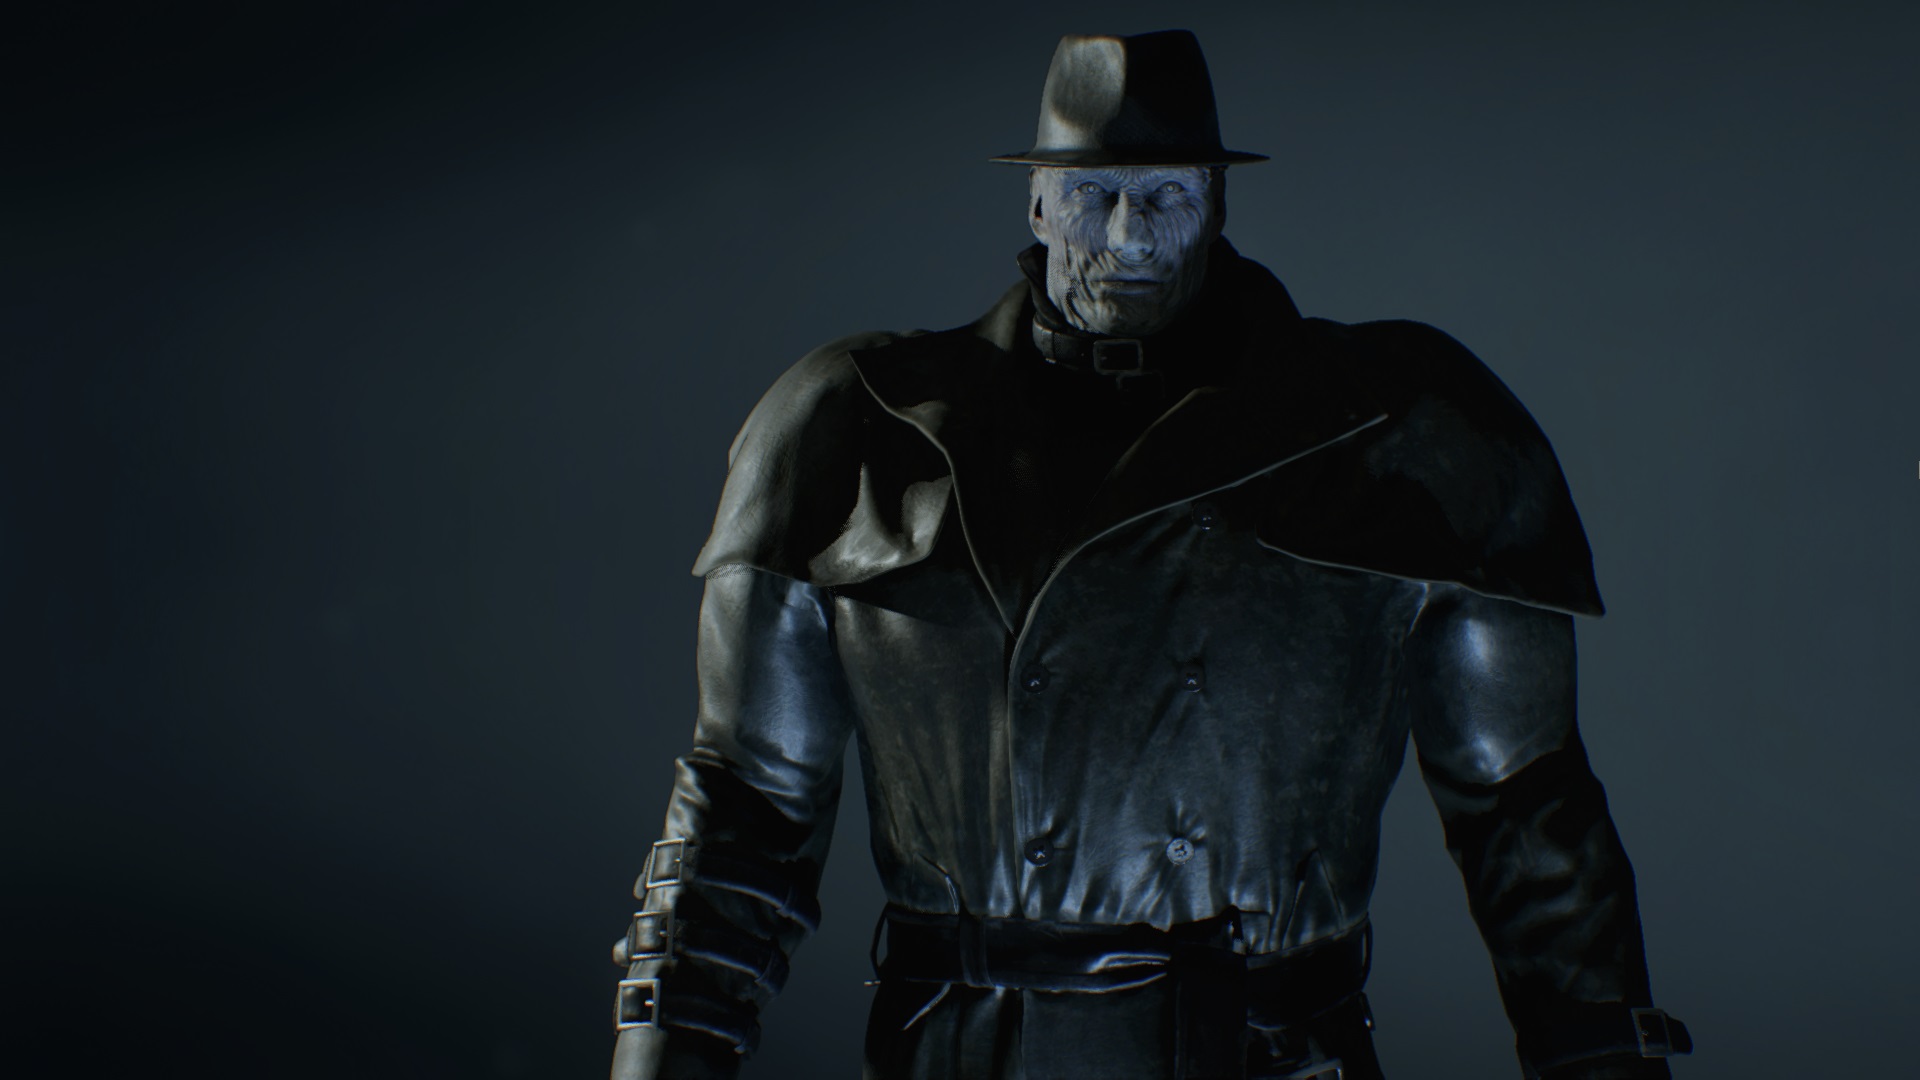 Resident Evil's Mr X Vs Nemesis - Which Monster Is More Powerful?